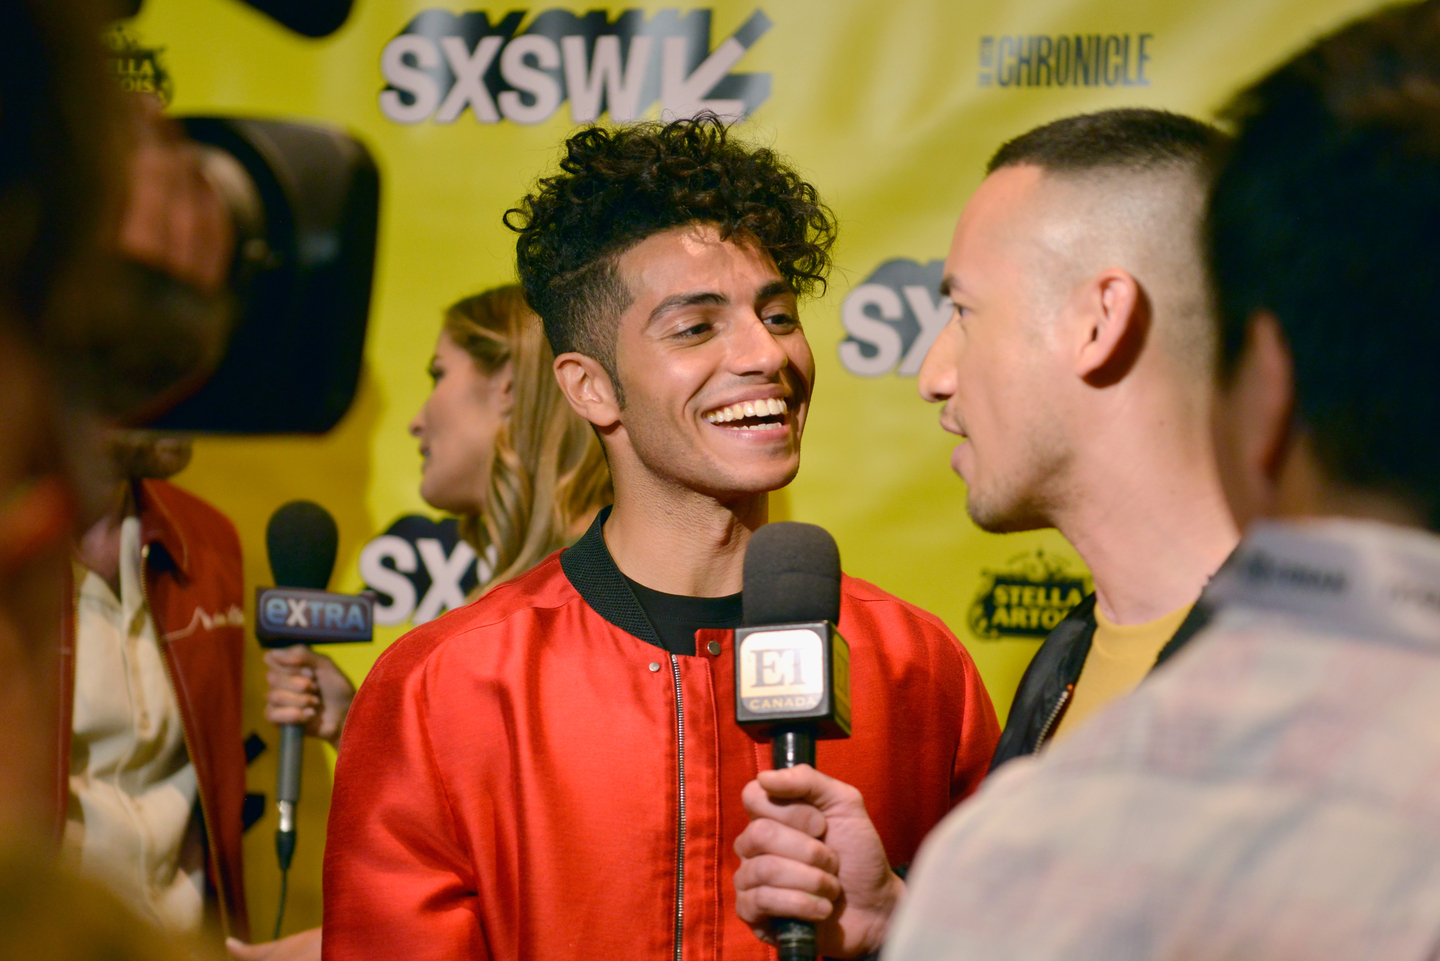 Mena Massoud at the Run This Town World Premiere – Photo by Nicola Gell/Getty Images for SXSW